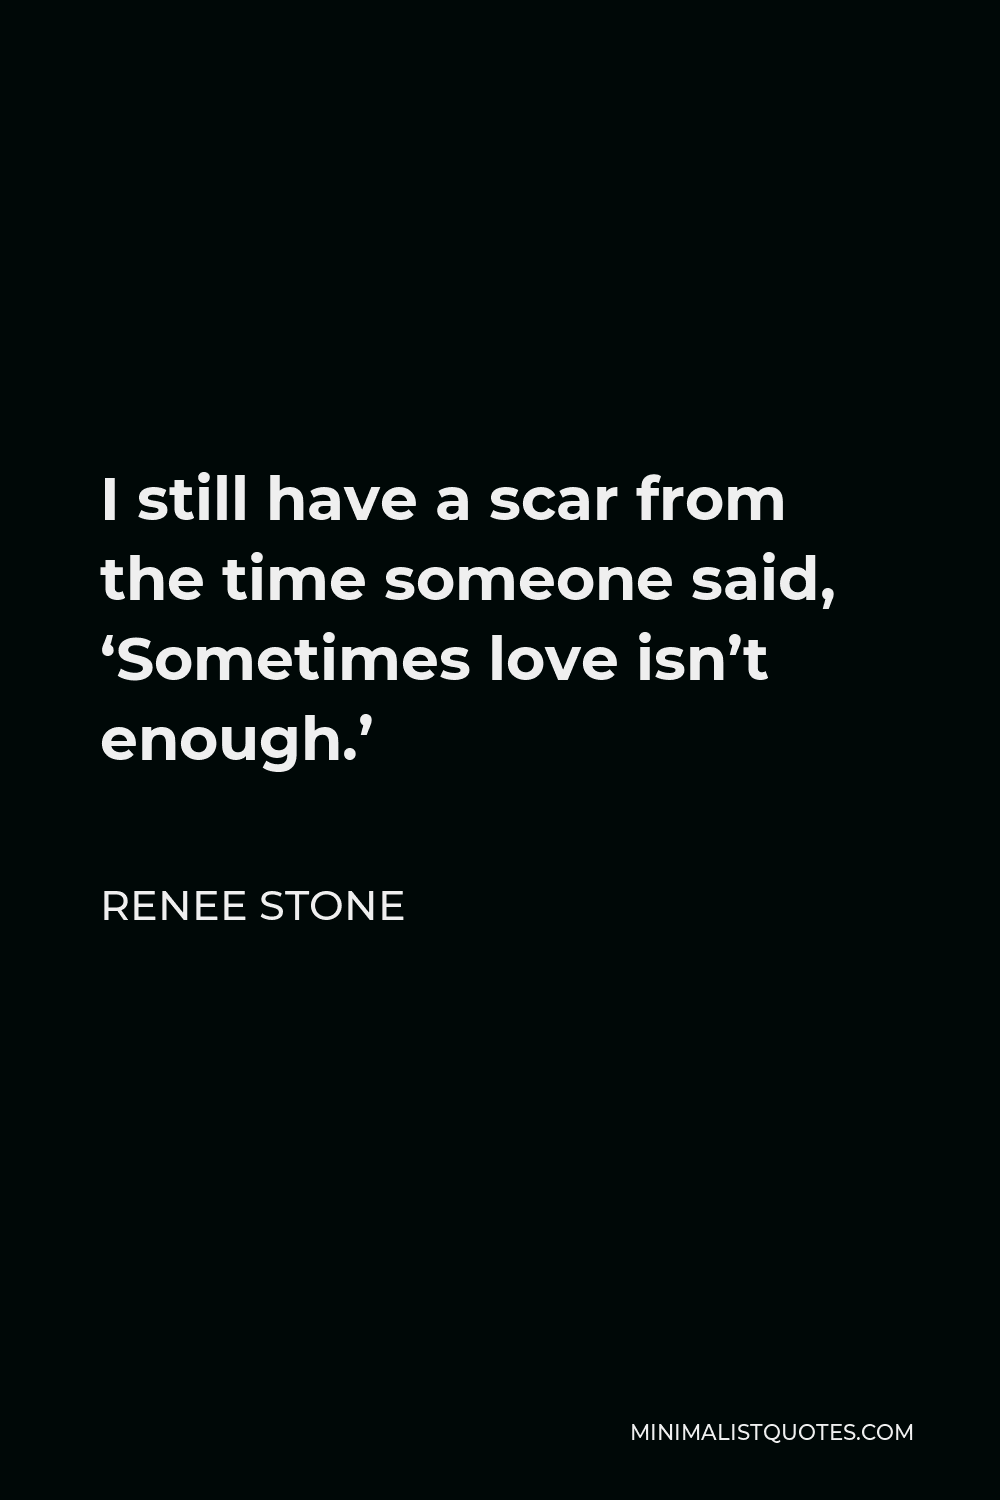 Renee Stone Quote - I still have a scar from the time someone said, ‘Sometimes love isn’t enough.’